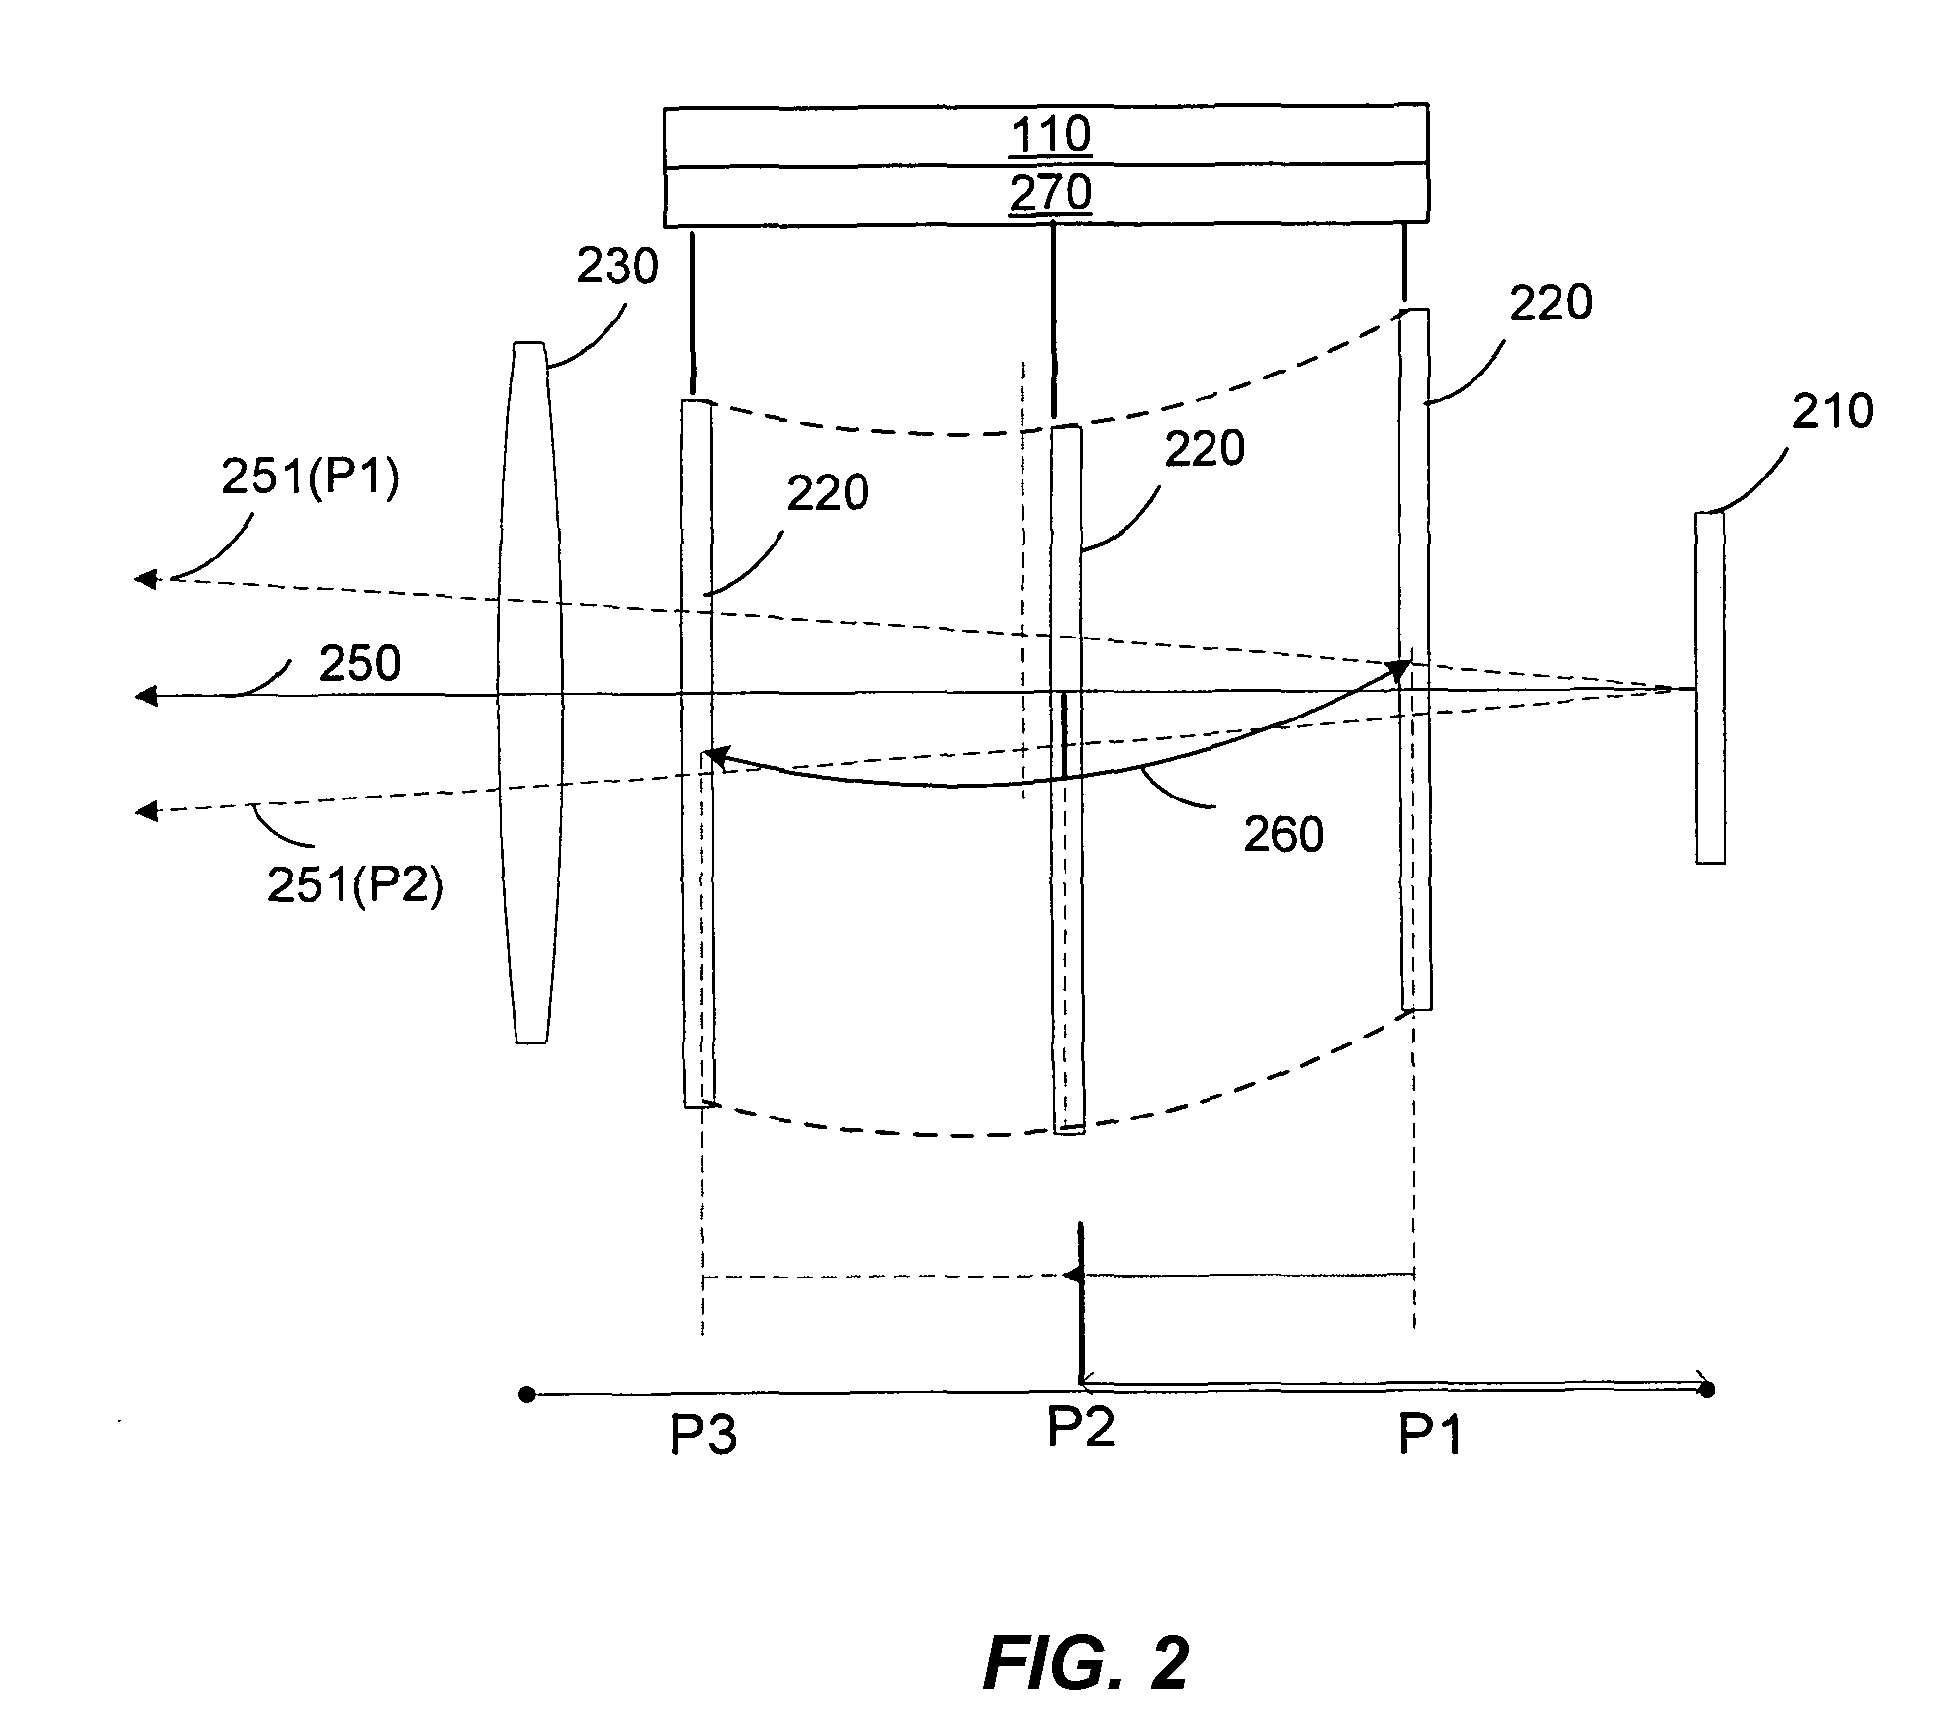 Correction of calibration errors in an optical instrument